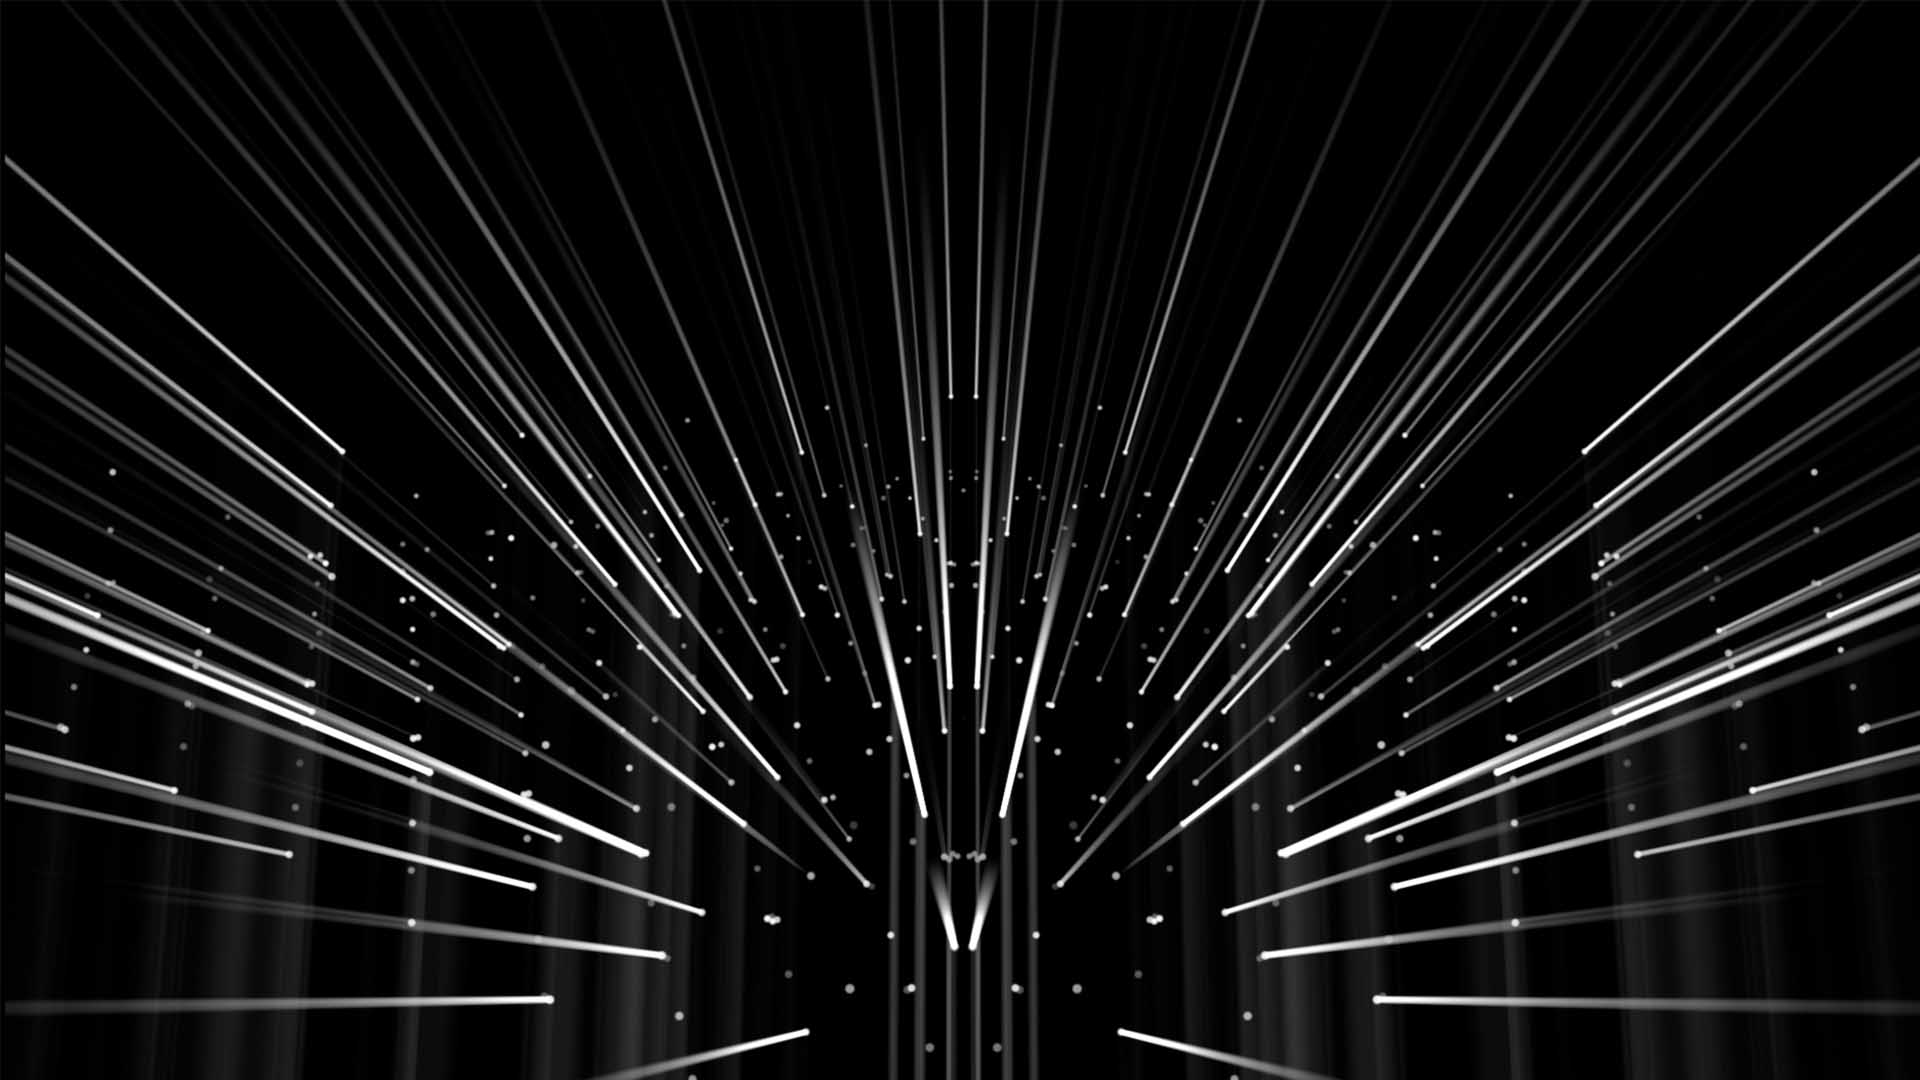 Motion Lines Video Wallpaper full hd background